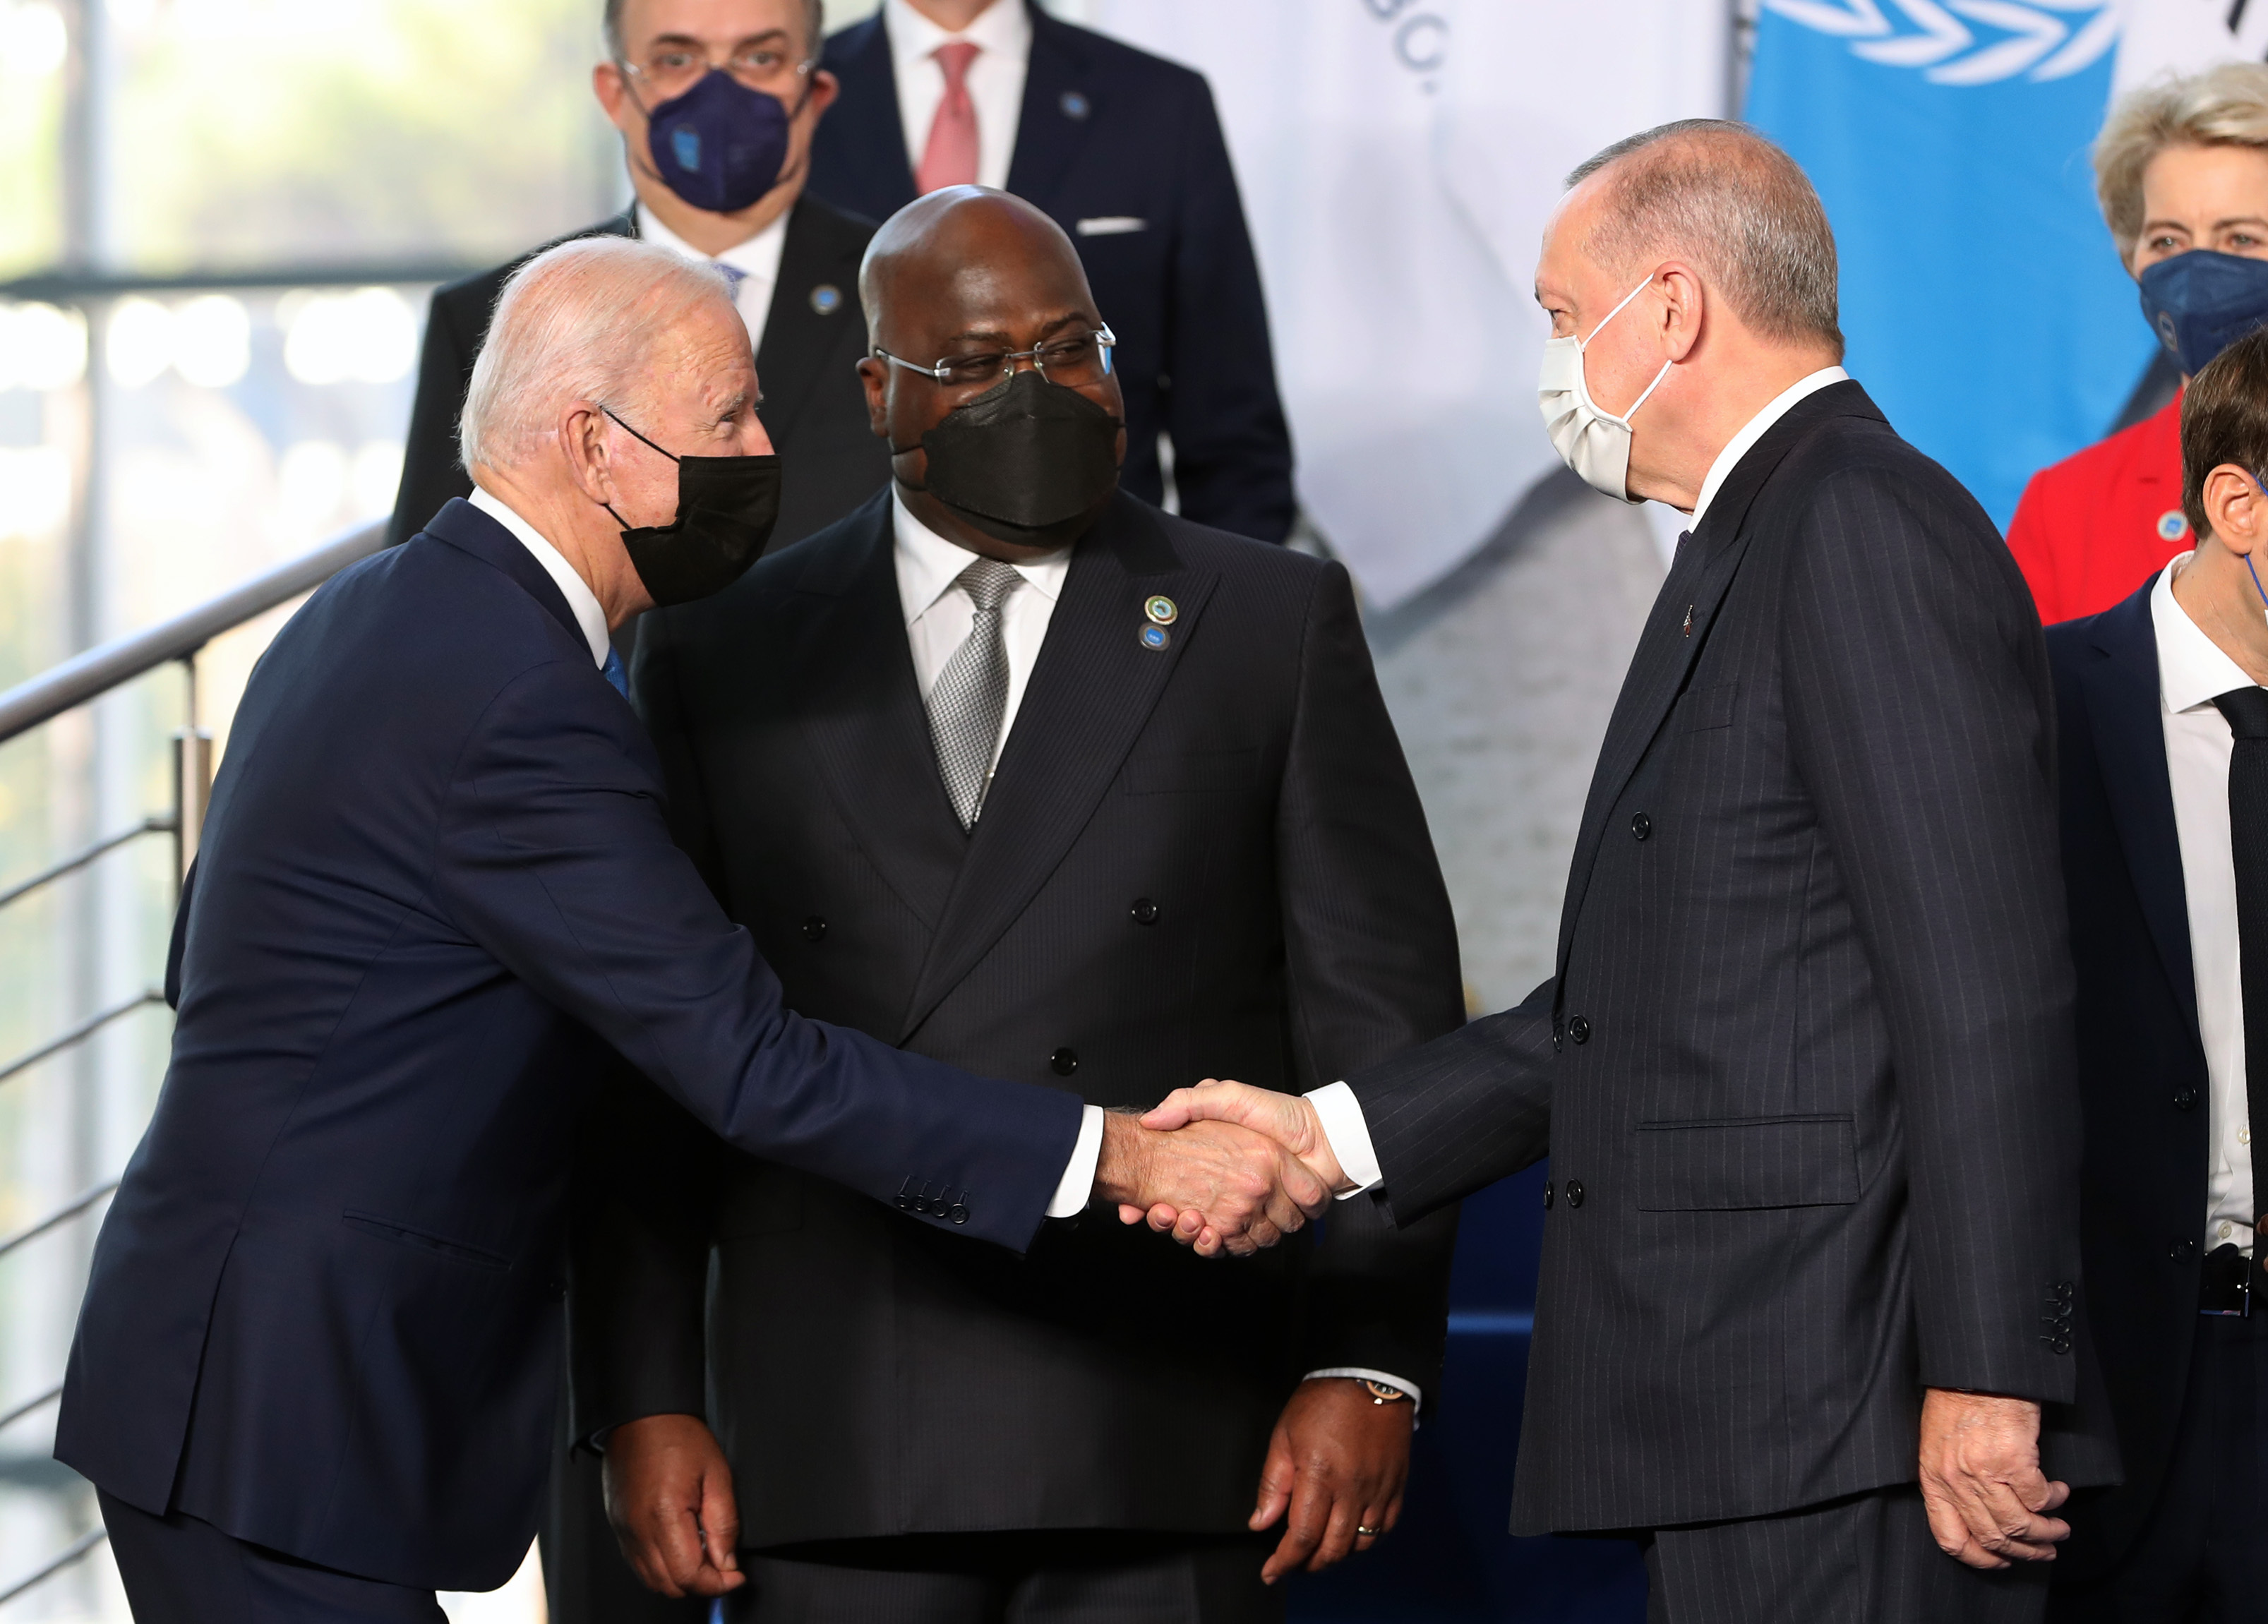 US President Joe Biden, left, greets President Recep Tayyip Erdogan of Turkey, right, during a "family" photo-op at the G20 summit in Rome, Italy on Saturday, October 30, 2021. The Democratic Republic of Congo's President and African Union Chair Felix Tshisekedi is seen in the center. Biden and Erdogan are meeting on Sunday. 